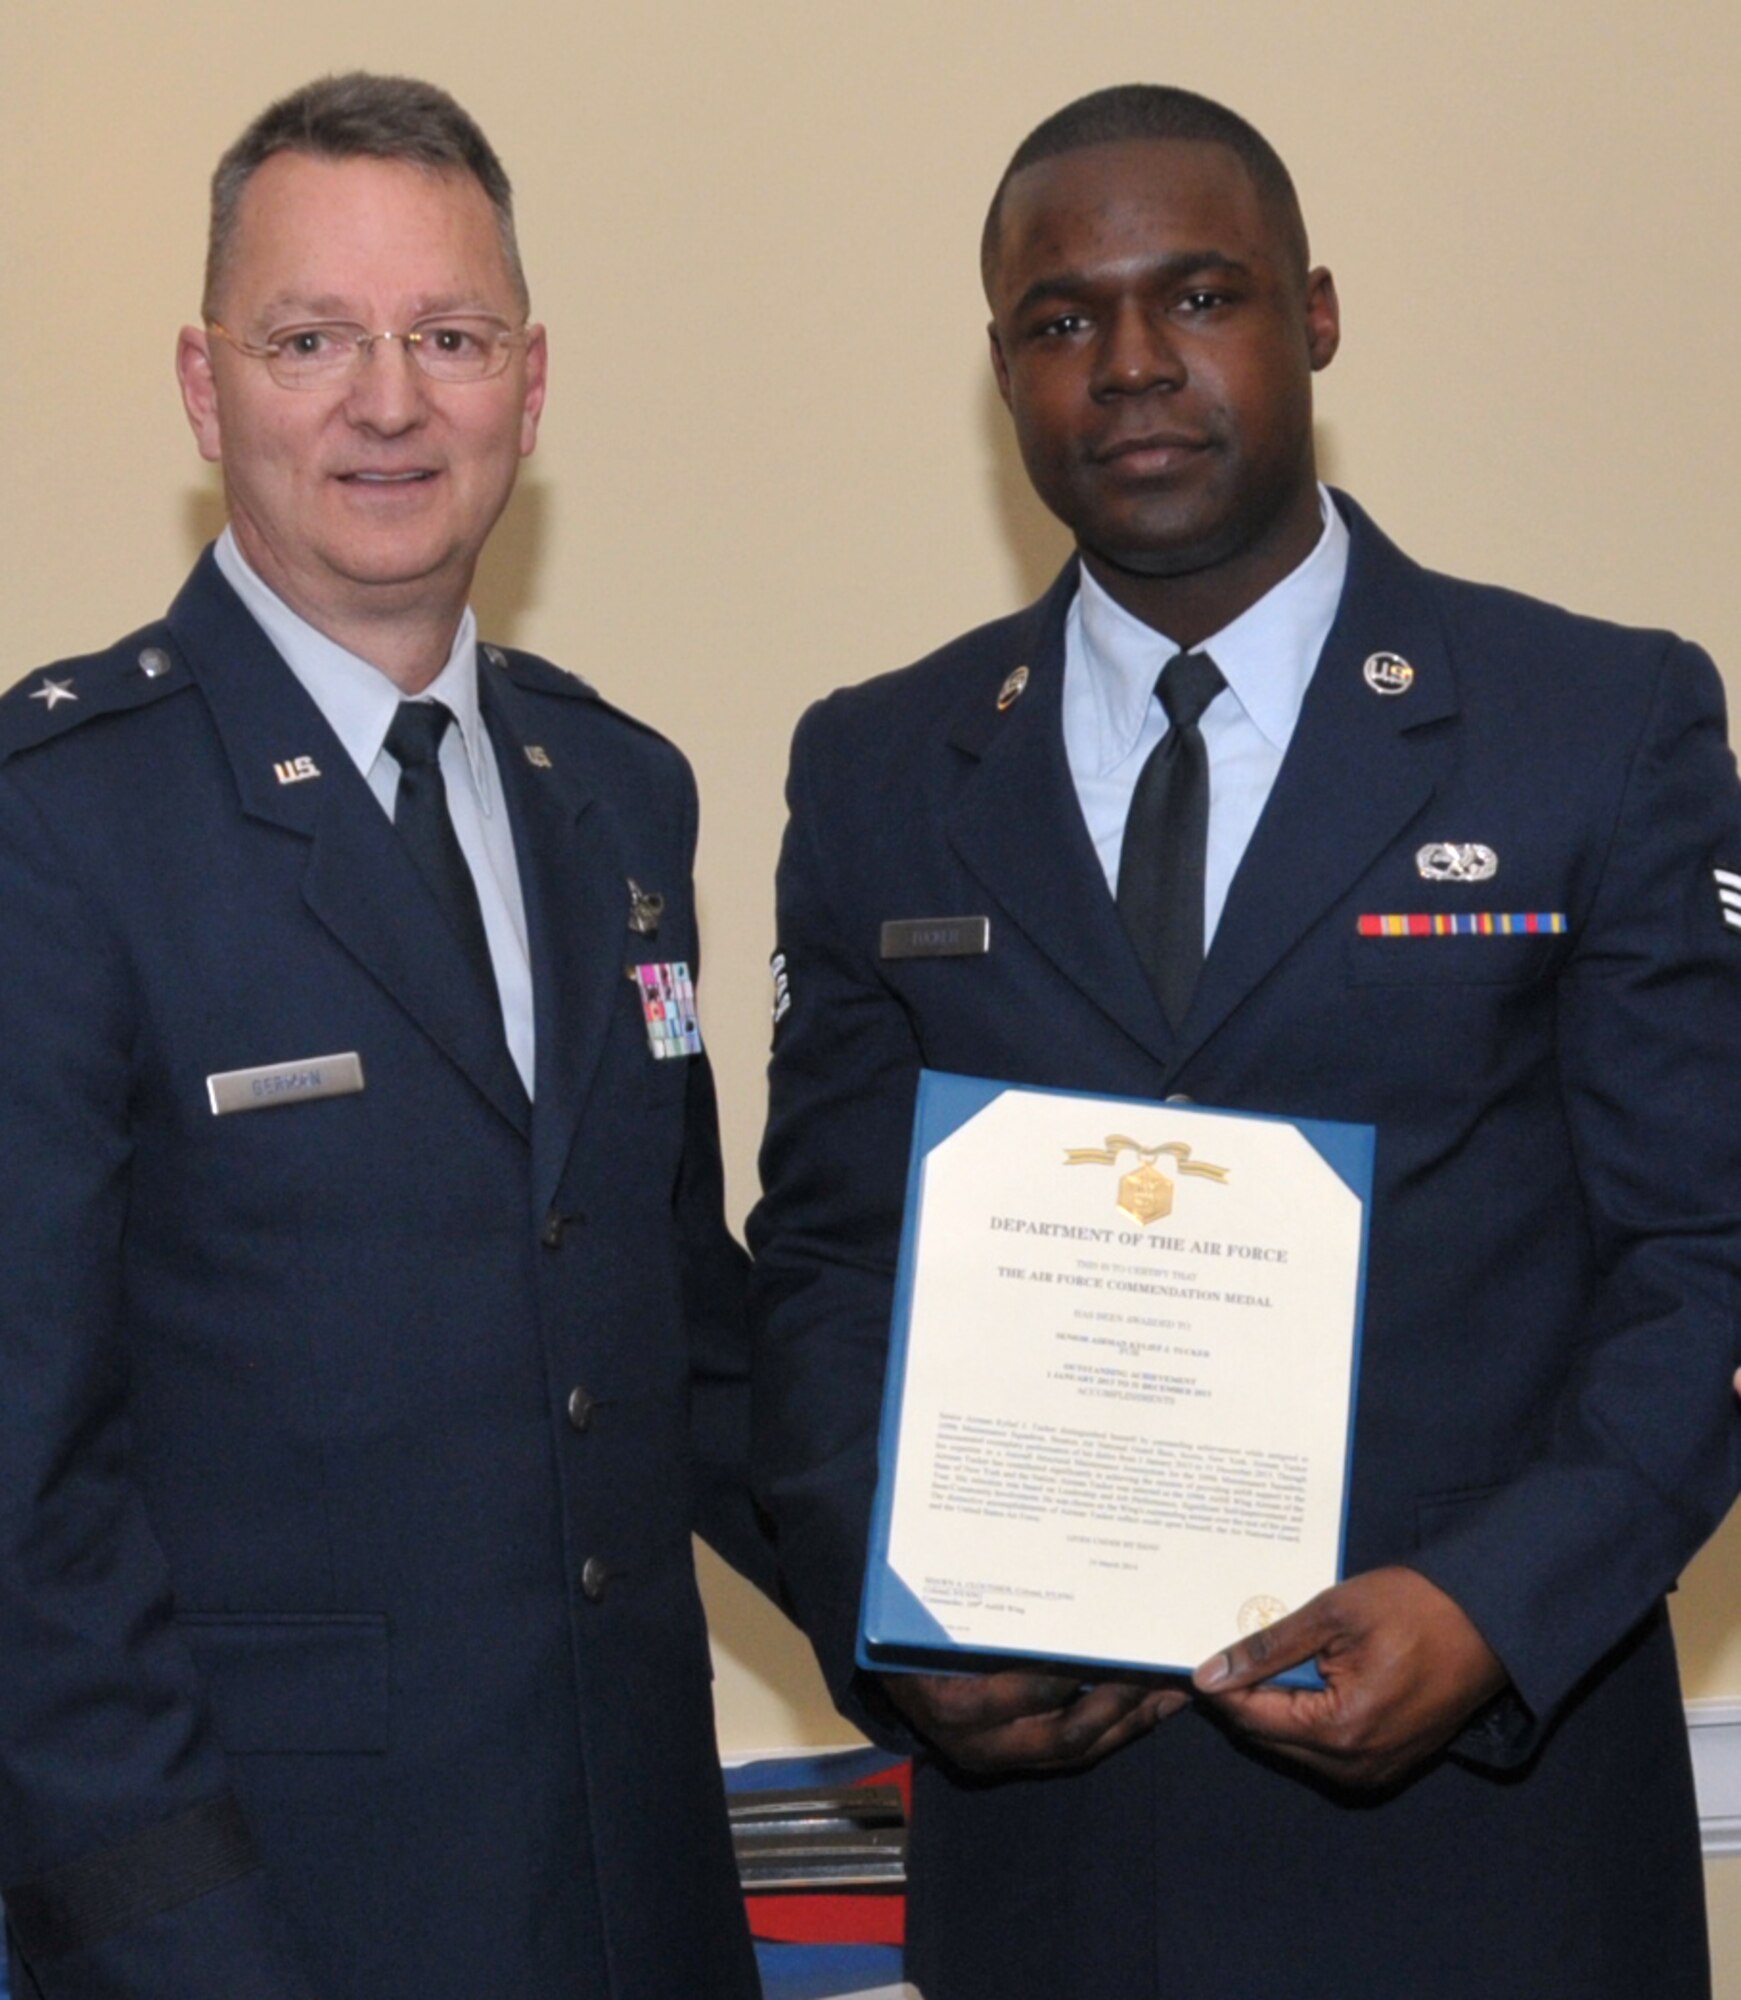 SCOTIA, N.Y. -- Tech. Sgt. Kylief Tucker, right, was named the 109th Airlift Wing's Airman of the Year. He was honored during the annual Airman of the Year Dinner on April 5. Also pictured is Brig. Gen. Anthony German, New York's Chief of Staff-Air. Tucker is assigned to the 109th Maintenance Squadron. (Air National Guard photo by Master Sgt. William Gizara)